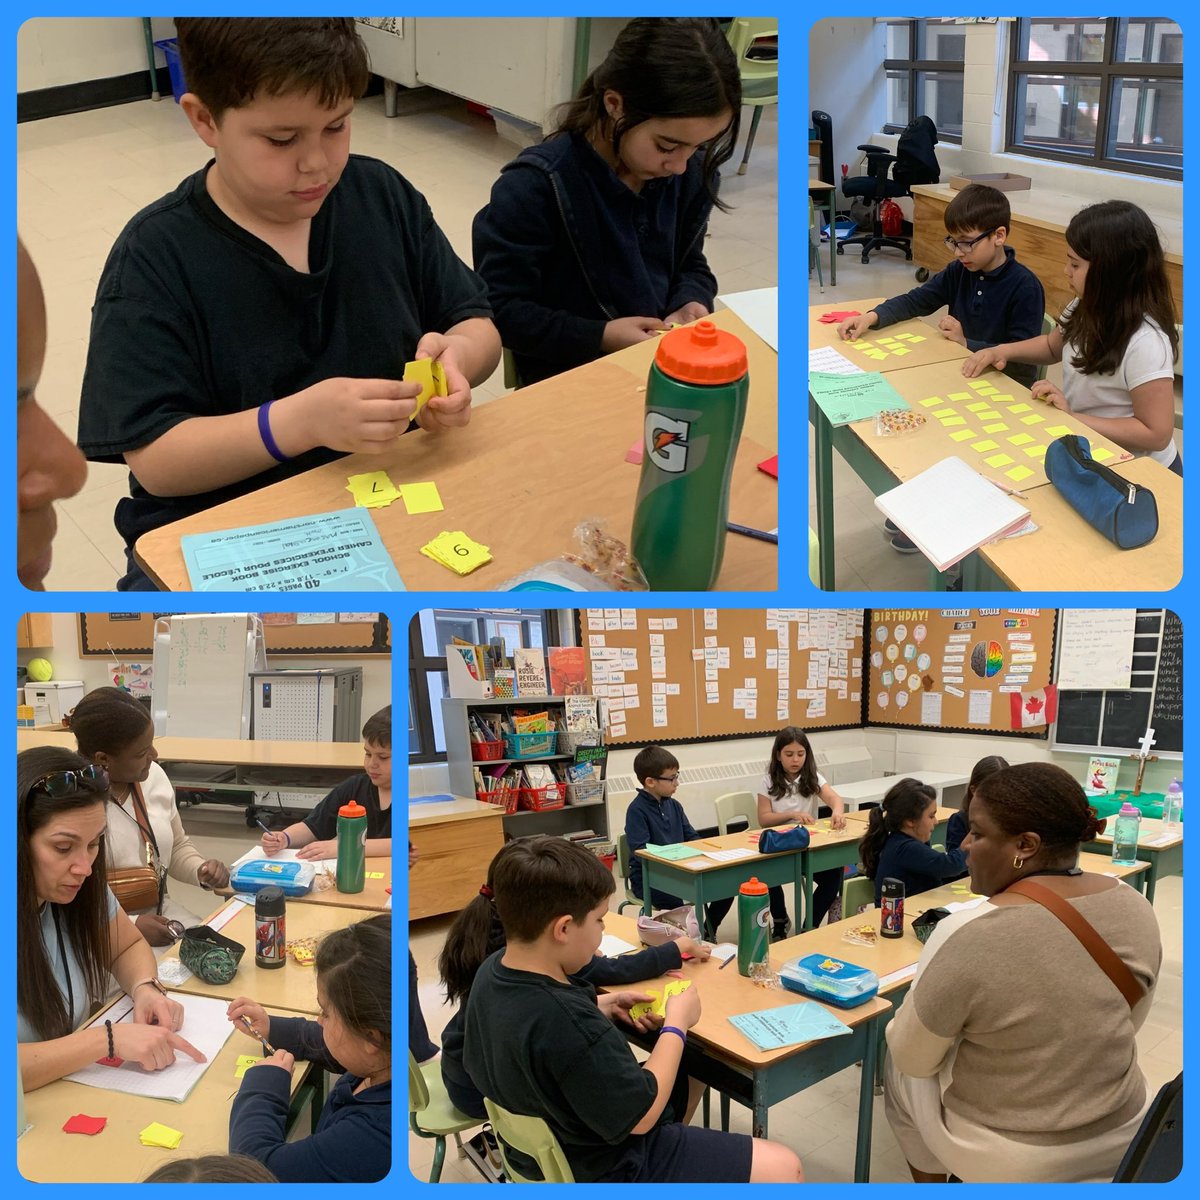 Our Math department were hands on at St. Nicholas of Bari to collaborate in many classes today. Amazing math talk and strategies of learning. Visits by: Ms. Dixon, Ms. Pastore and Mr. Ferinho! Great collaboration@TCDSB @TrusteeDAmico @TCDSB_RDAddario @TCDSB_MathSO @PastoreN229